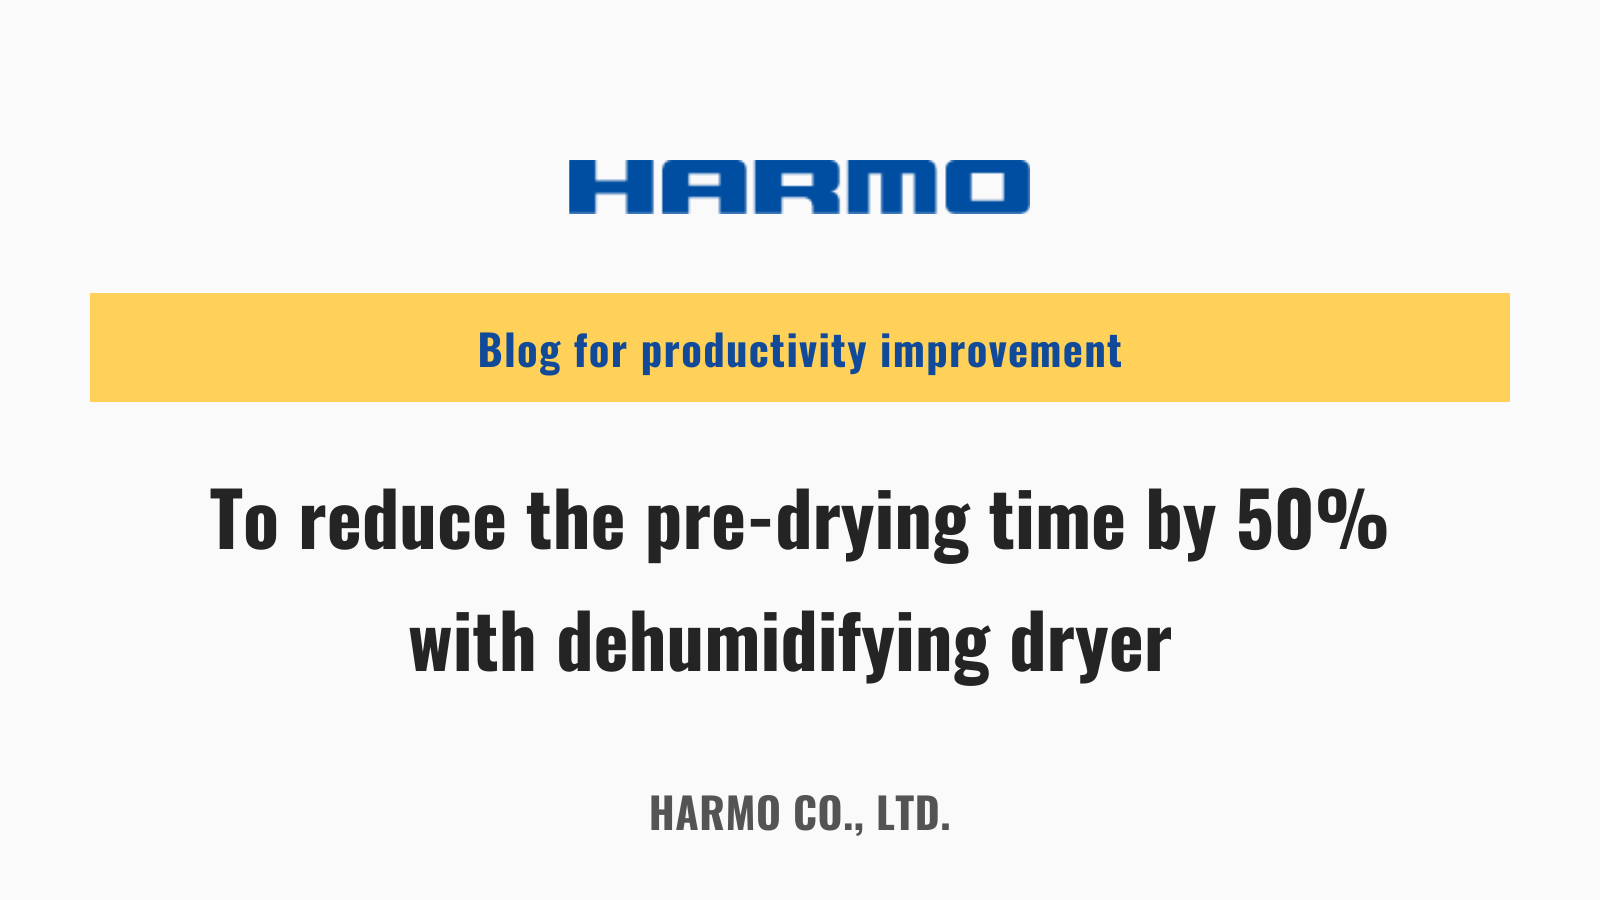 To reduce the pre-drying time by 50 with dehumidifying dryer